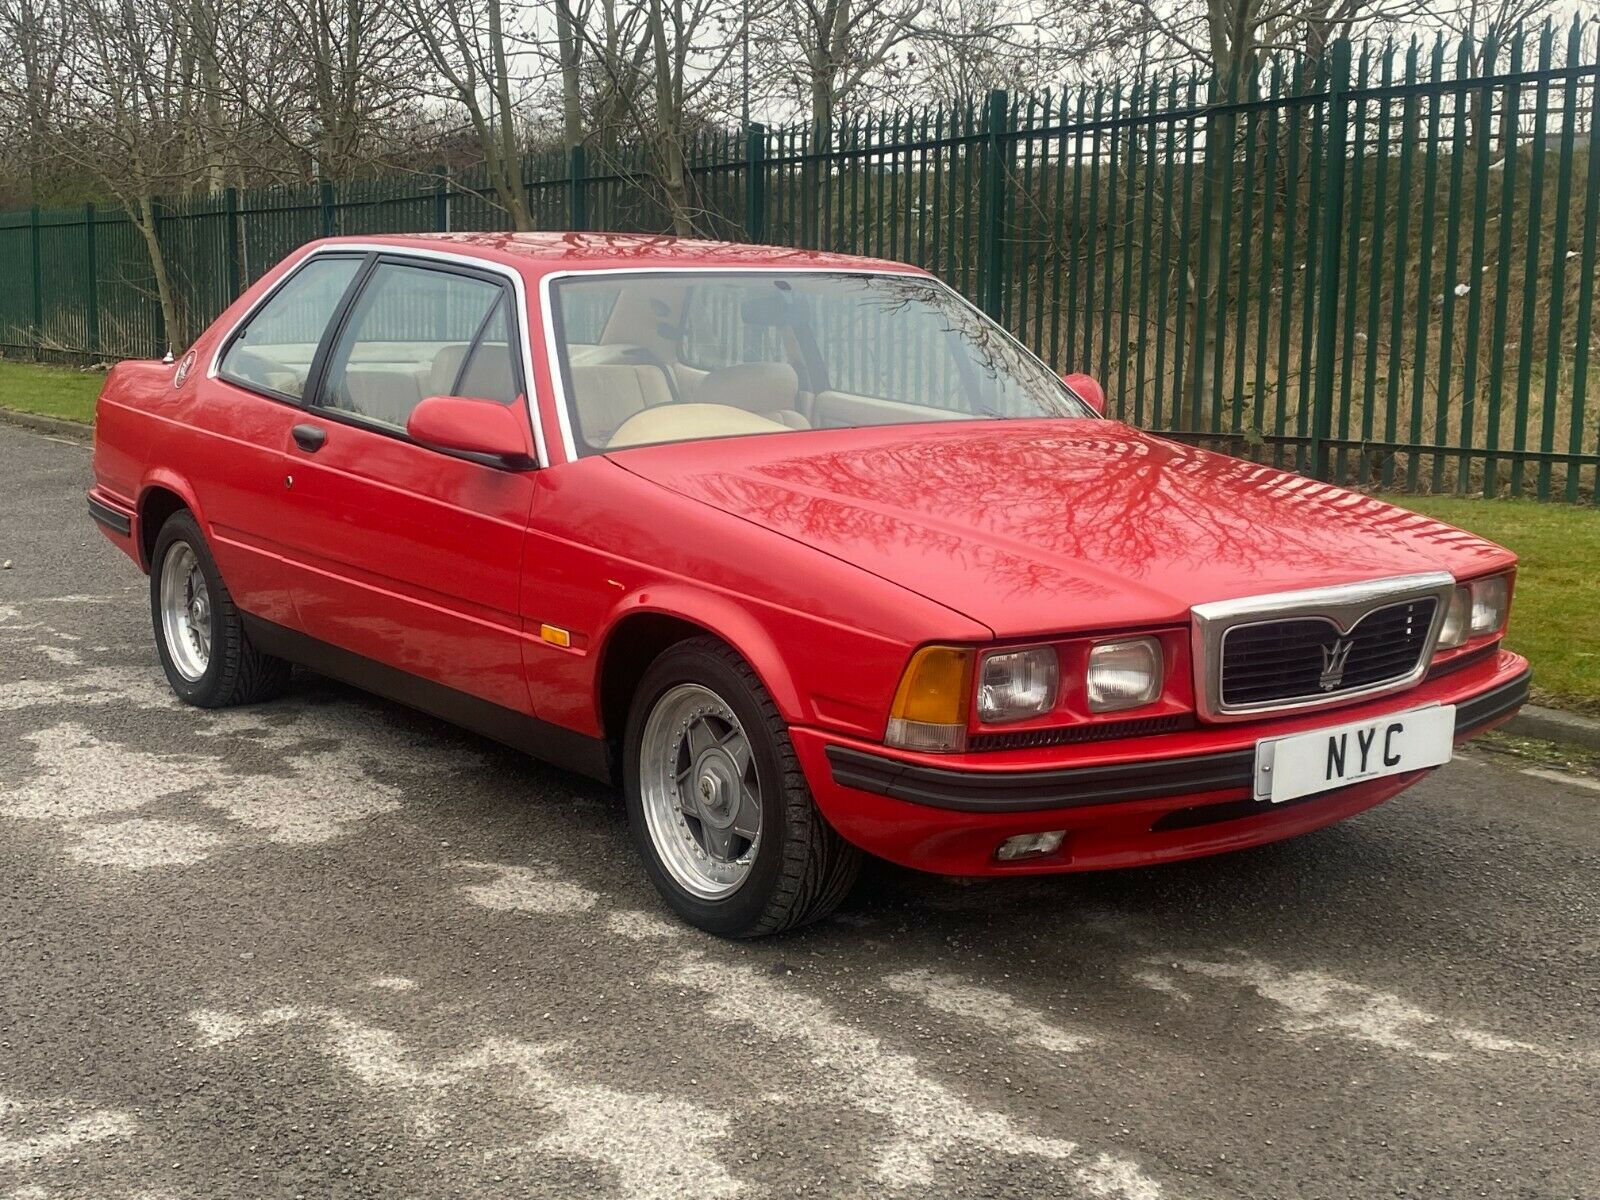 Own a piece of Maserati history – former 228 UK press car for sale